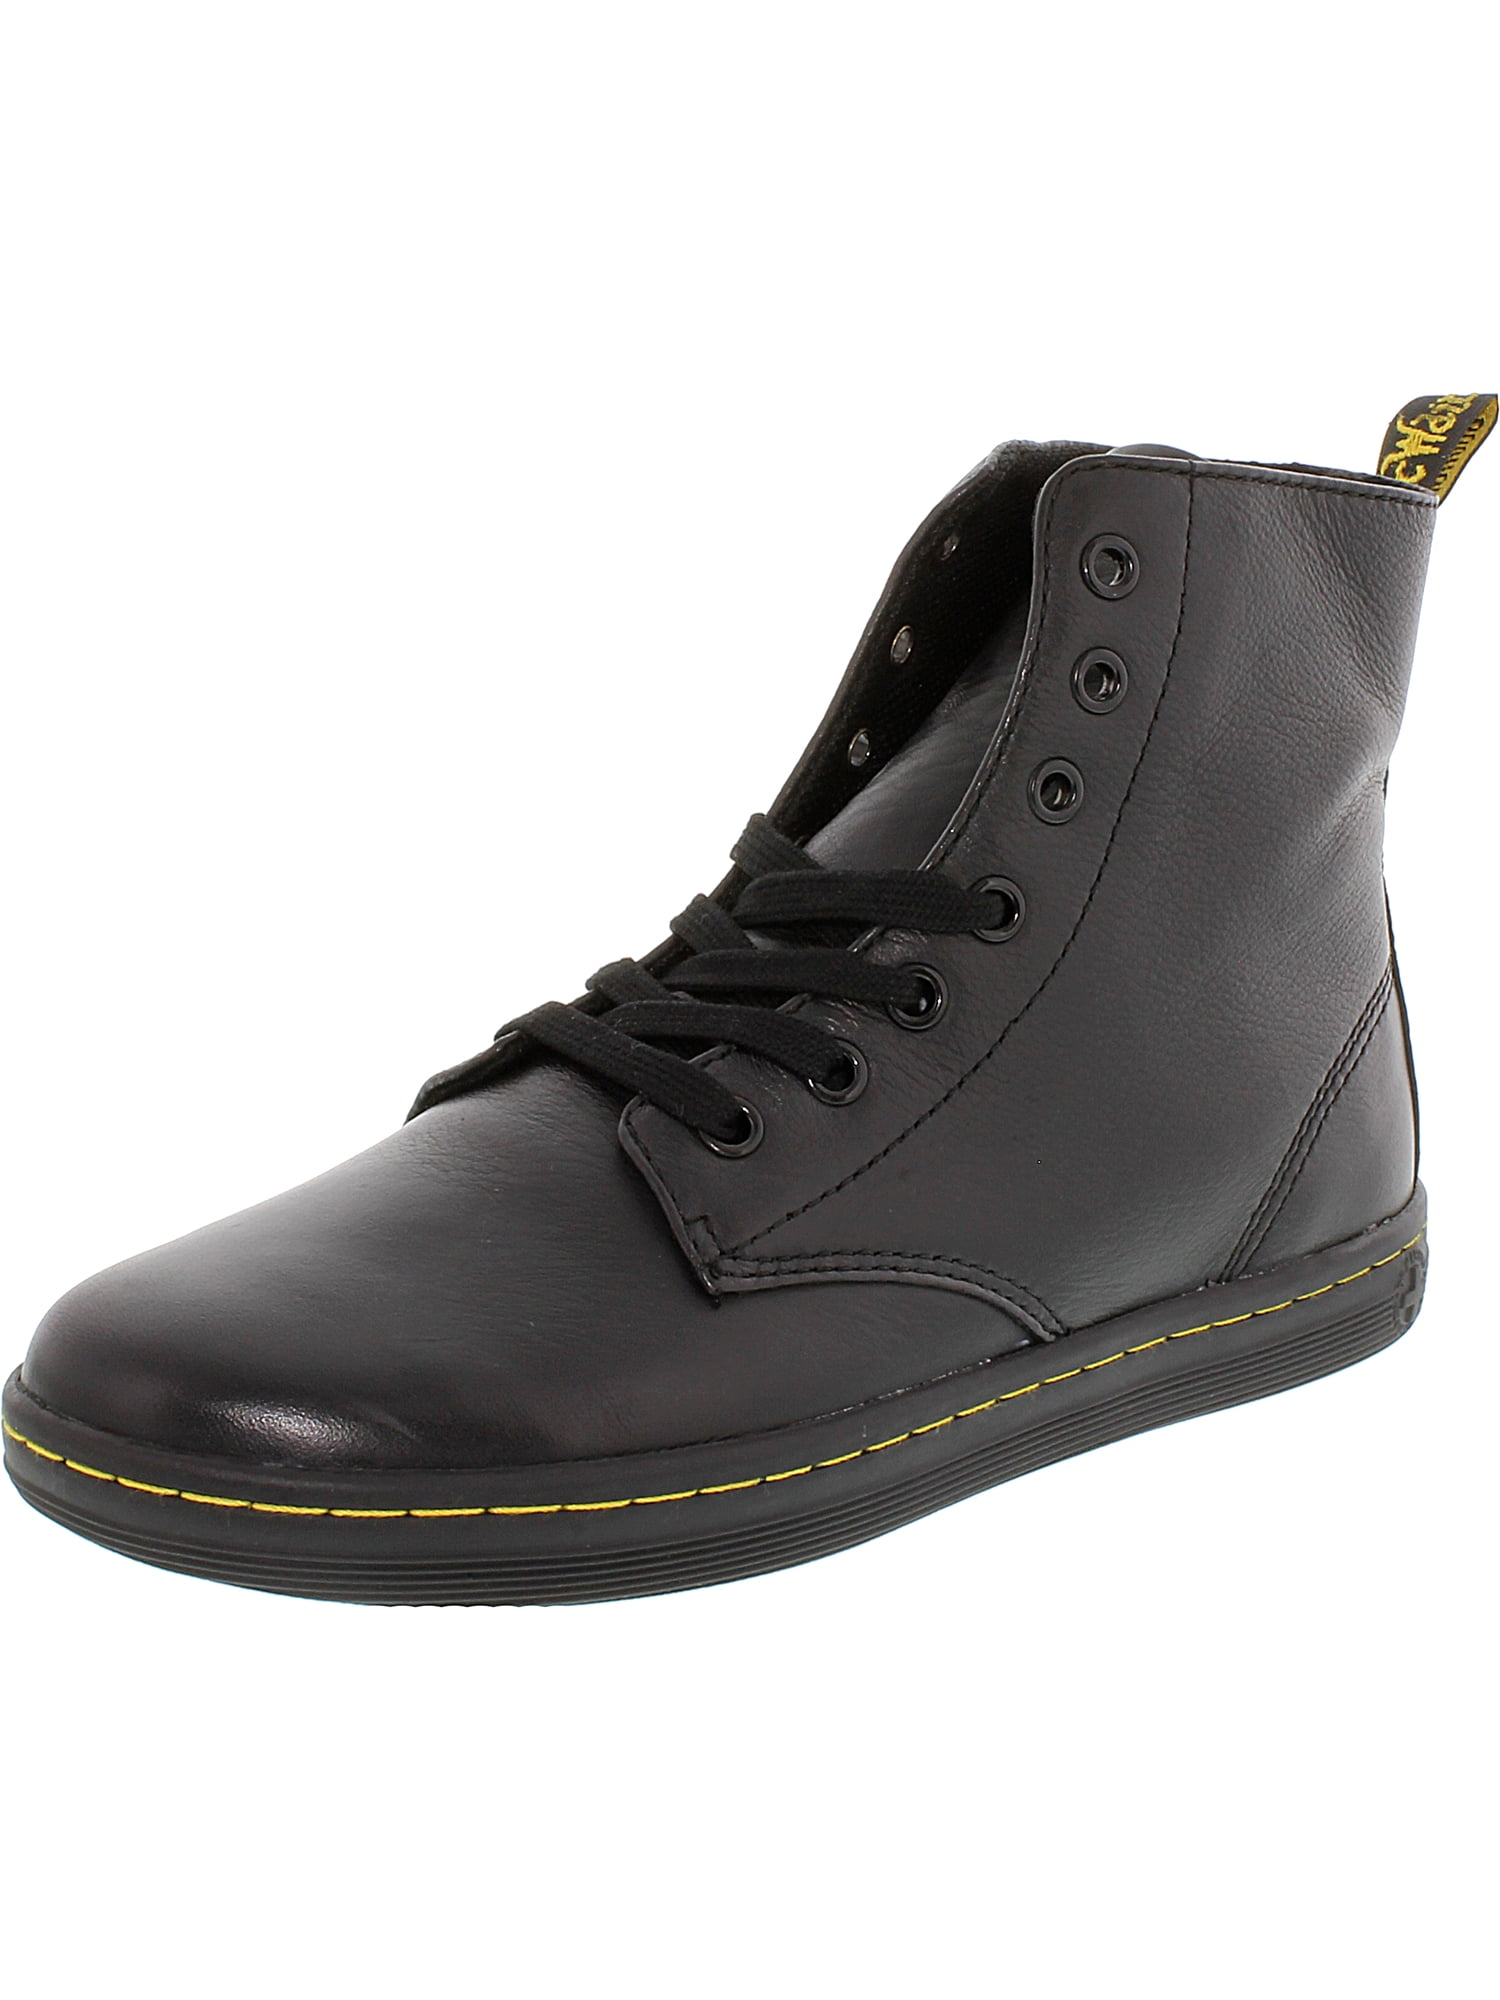 Dr. Martens - Women's Leyton Black Ankle-High Leather Boot - 9M ...